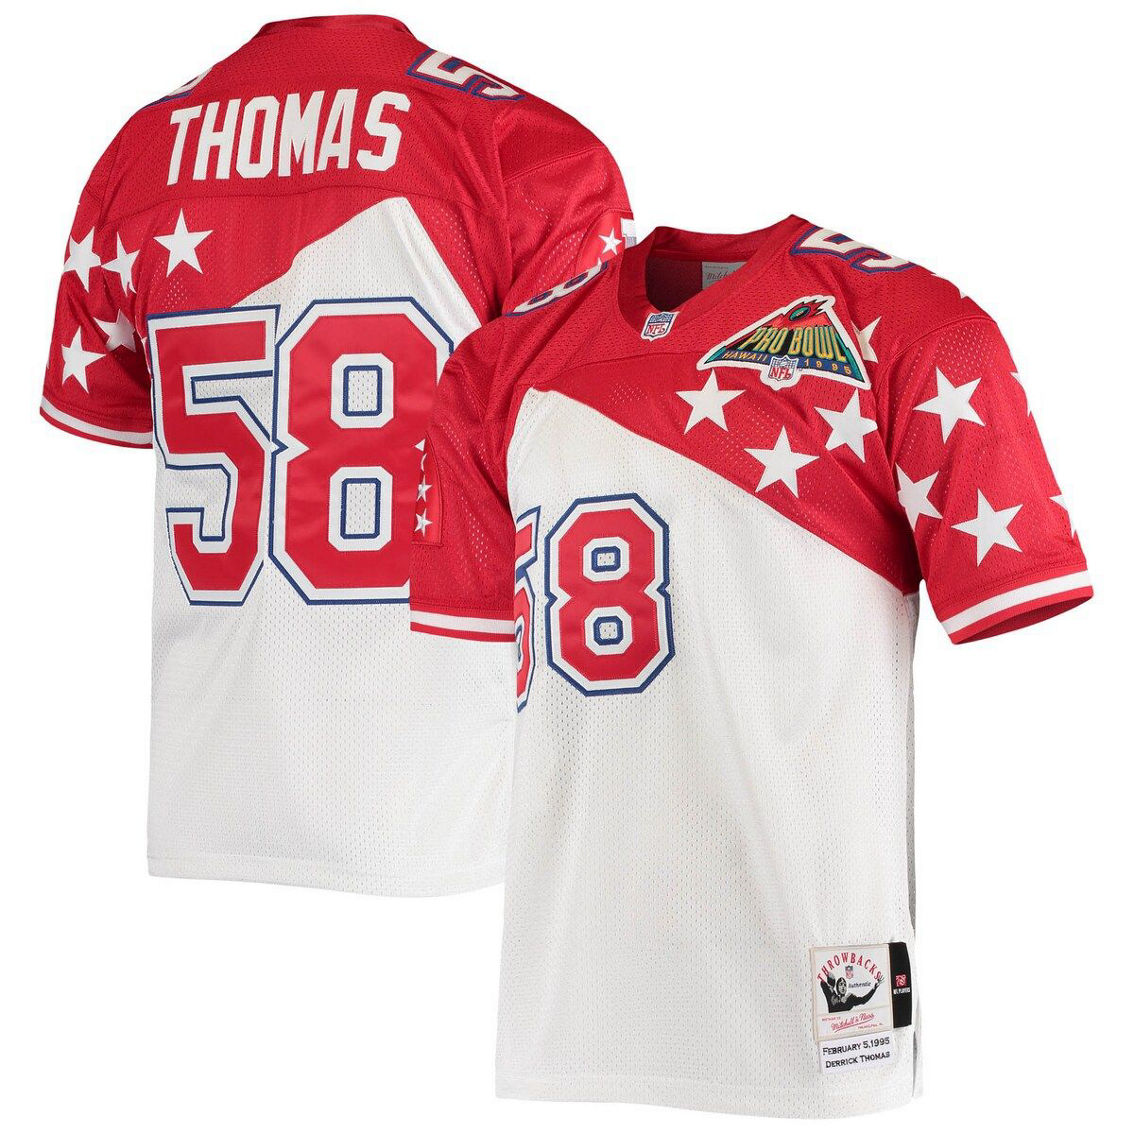 Mitchell & Ness Men's Derrick Thomas White/Red AFC 1995 Pro Bowl Authentic Jersey - Image 2 of 4